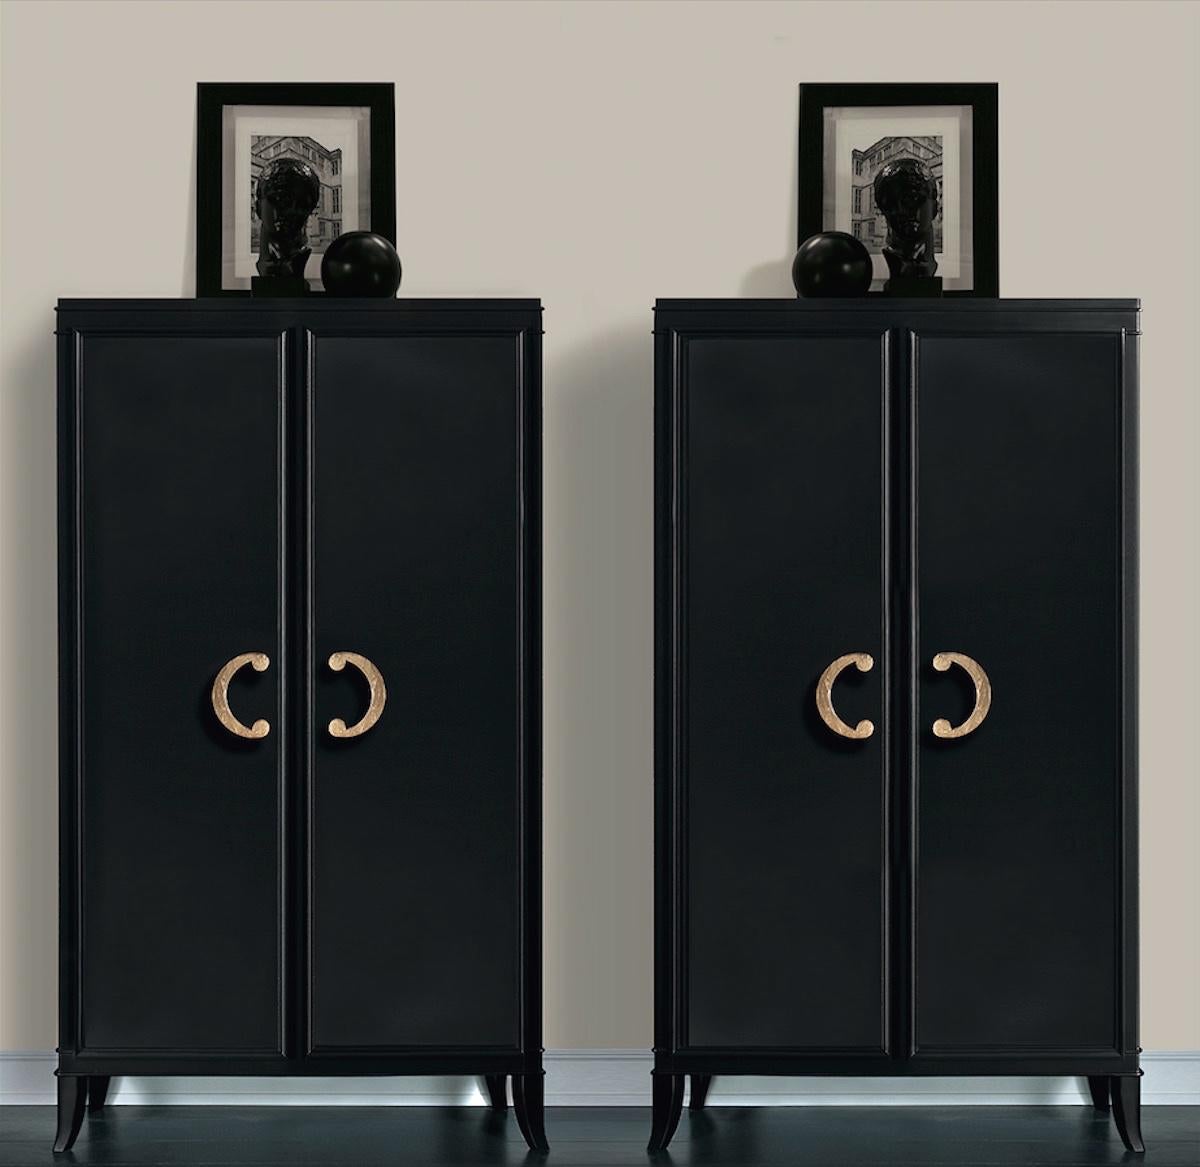 Designed by IC and realized by expert Italian artisans, the closet features two doors hiding four internal shelves. The panels are enriched with hand-applied gold leaf handles which add a glamorous allure to the piece.
Finish: dark mocha lacquered